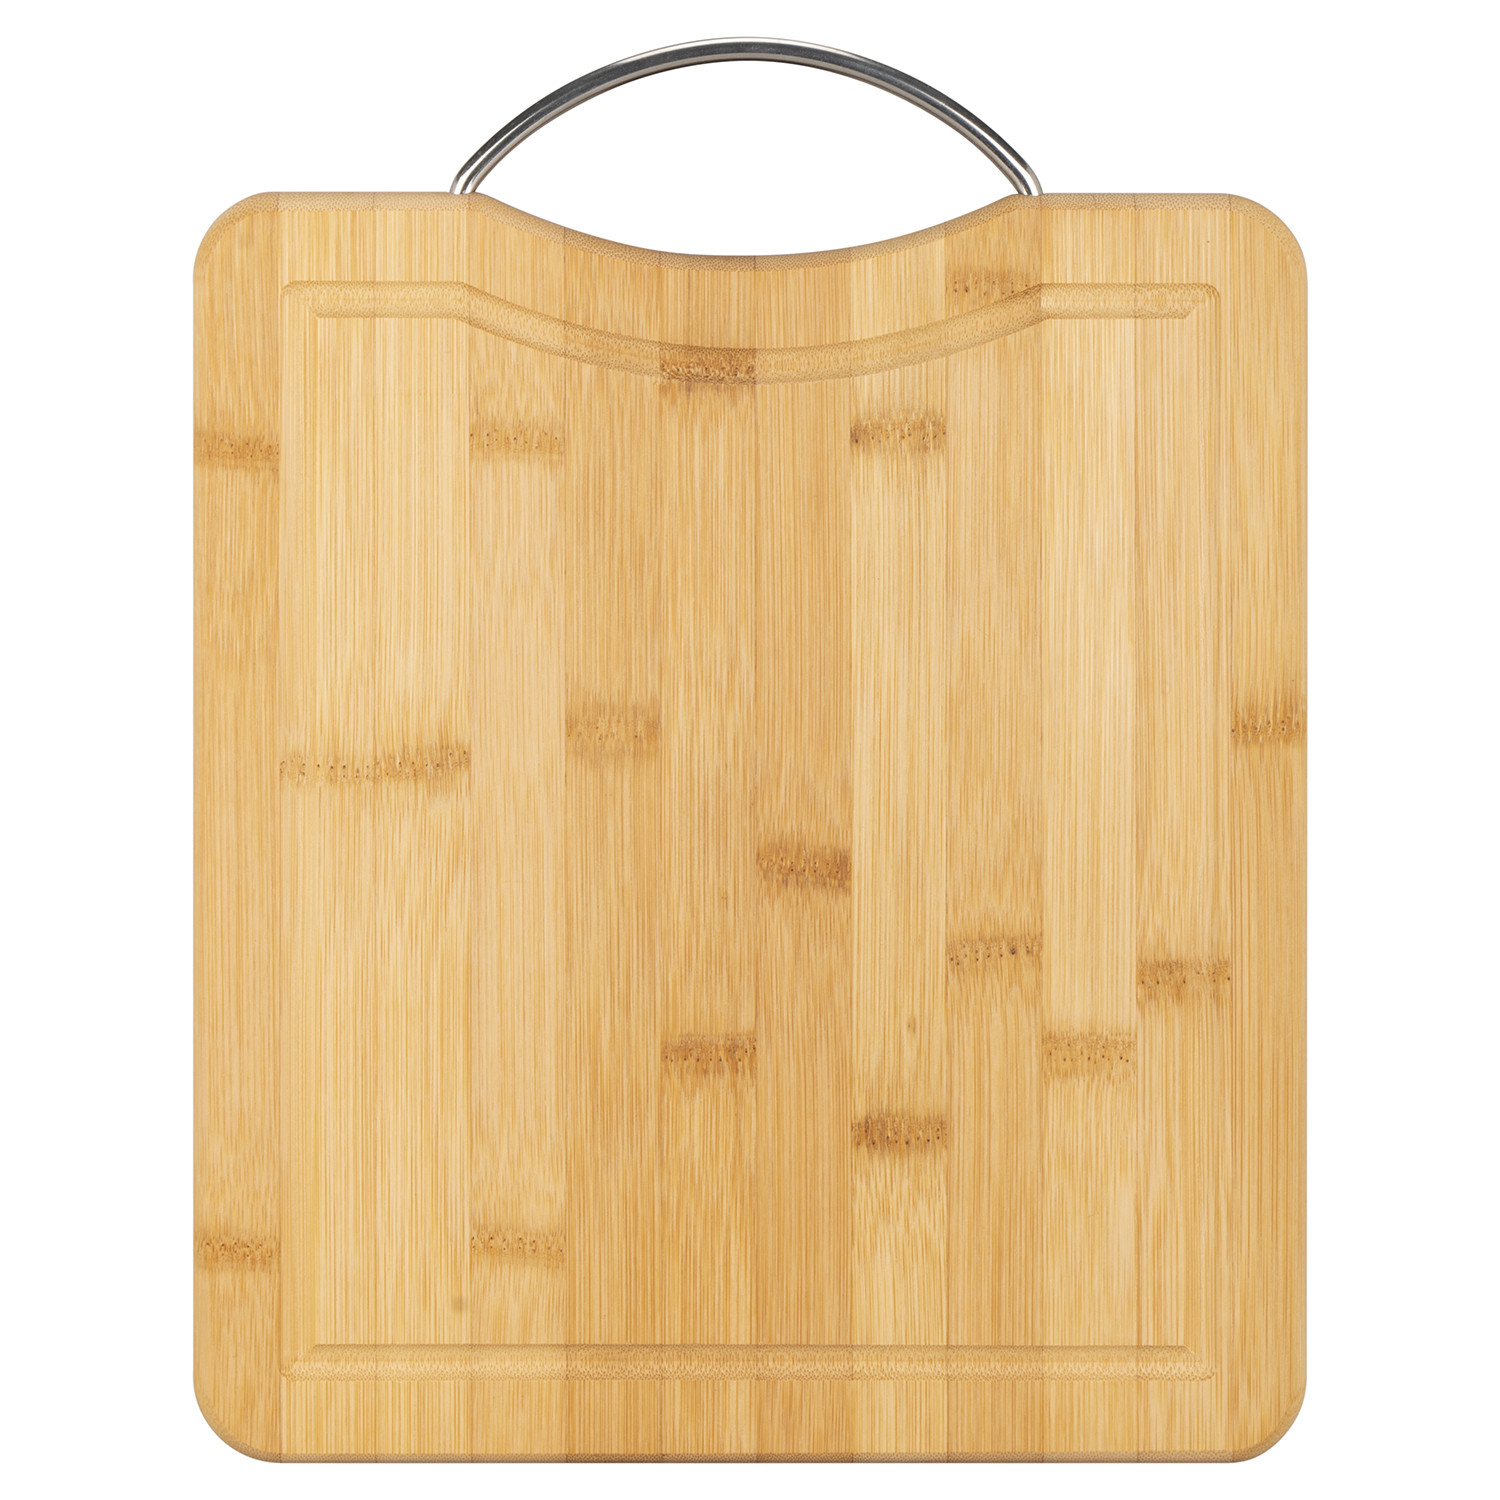 Medium Bamboo Chopping Board with Wire Handle Image 1